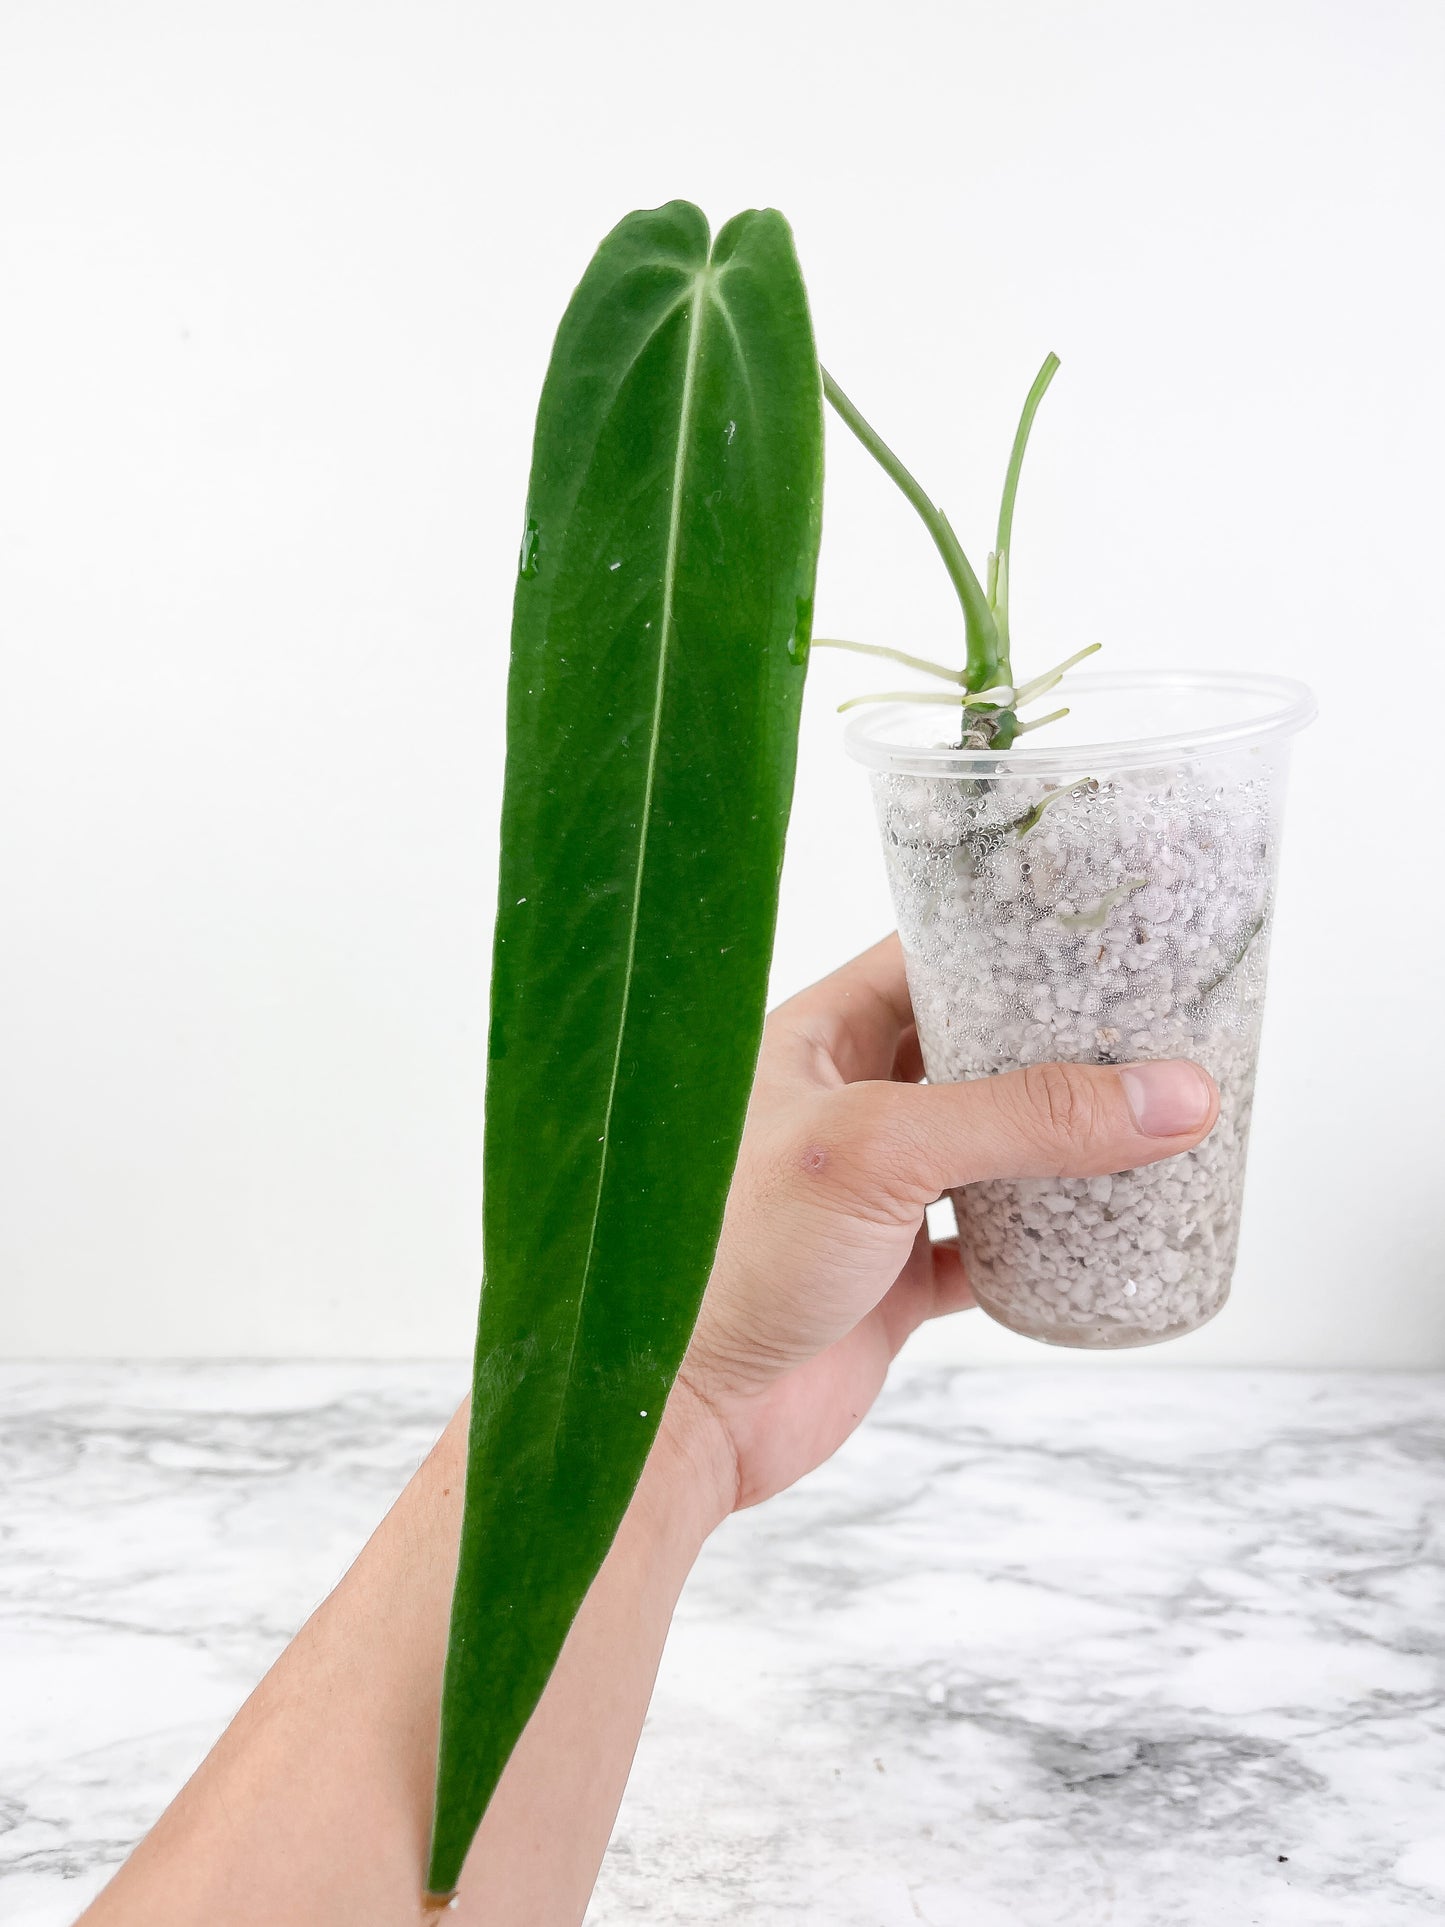 Anthurium warocqueanum (Dark and narrow) rooted 1 leaf 6-7" long